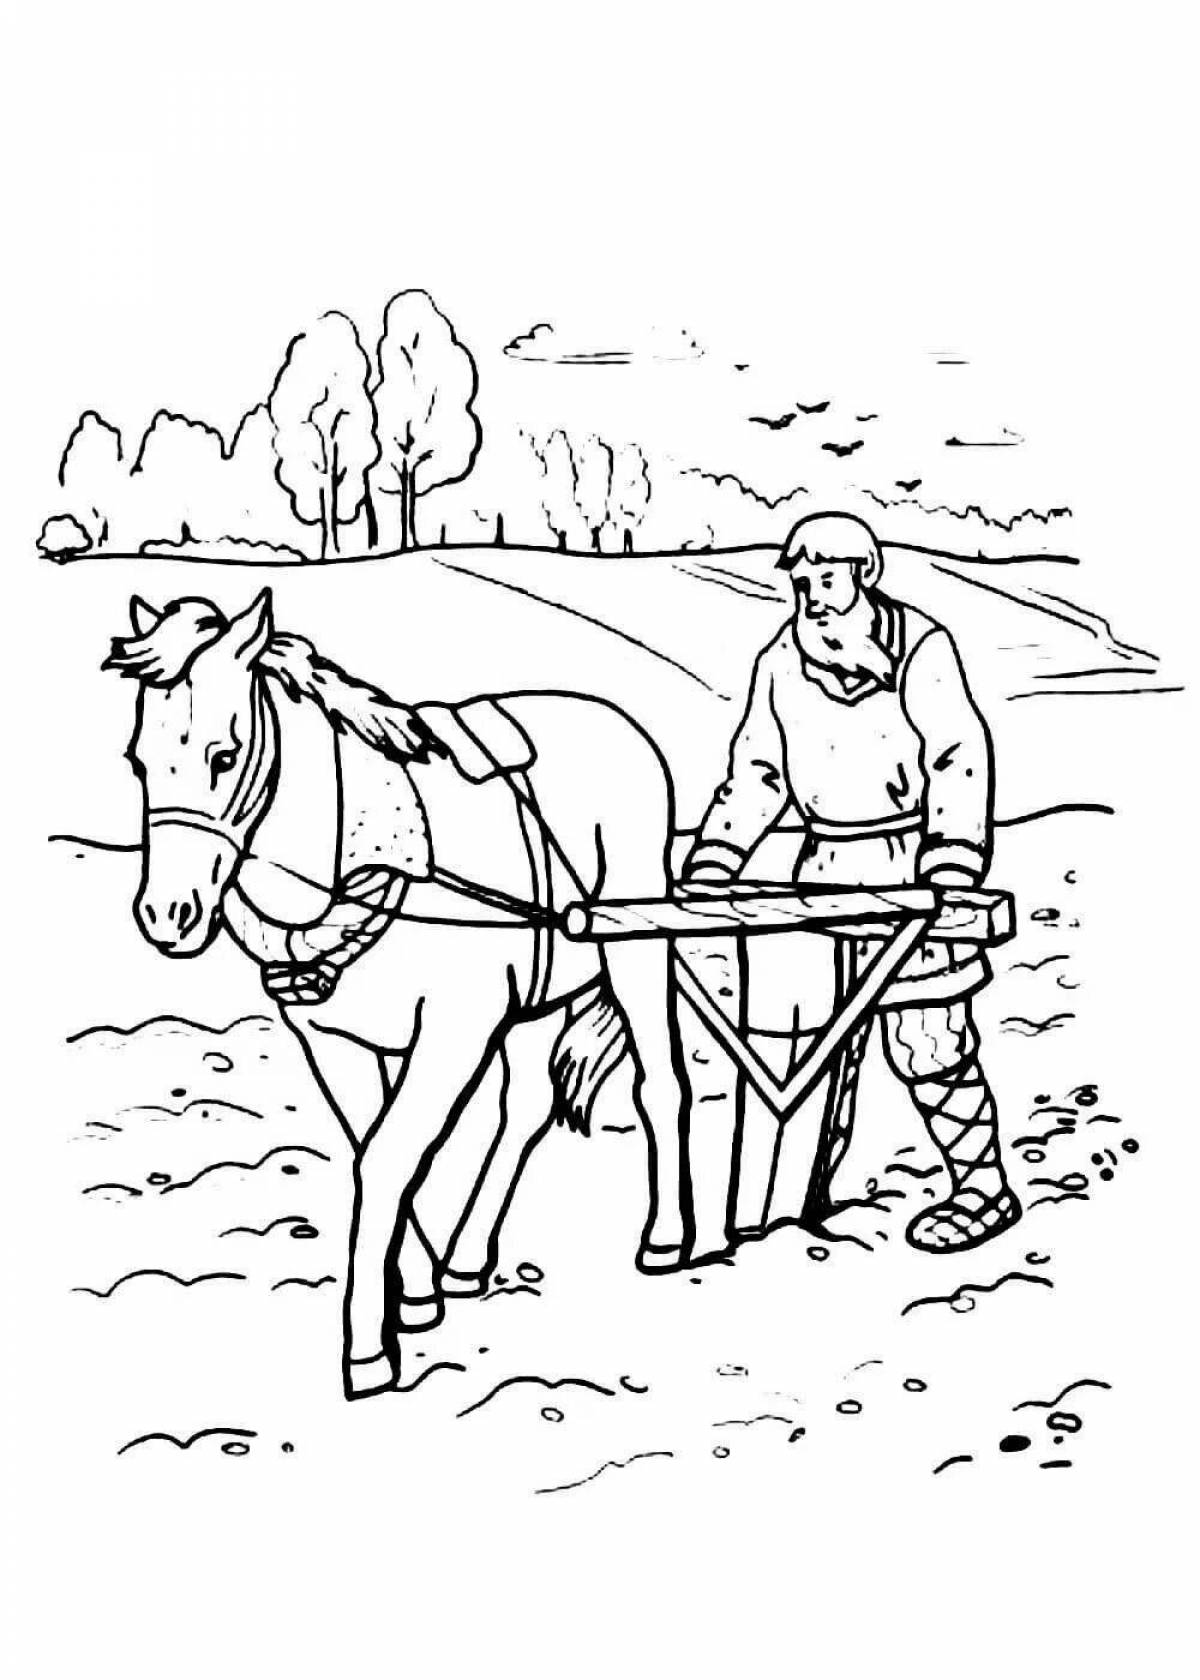 Coloring page charming peasant labor